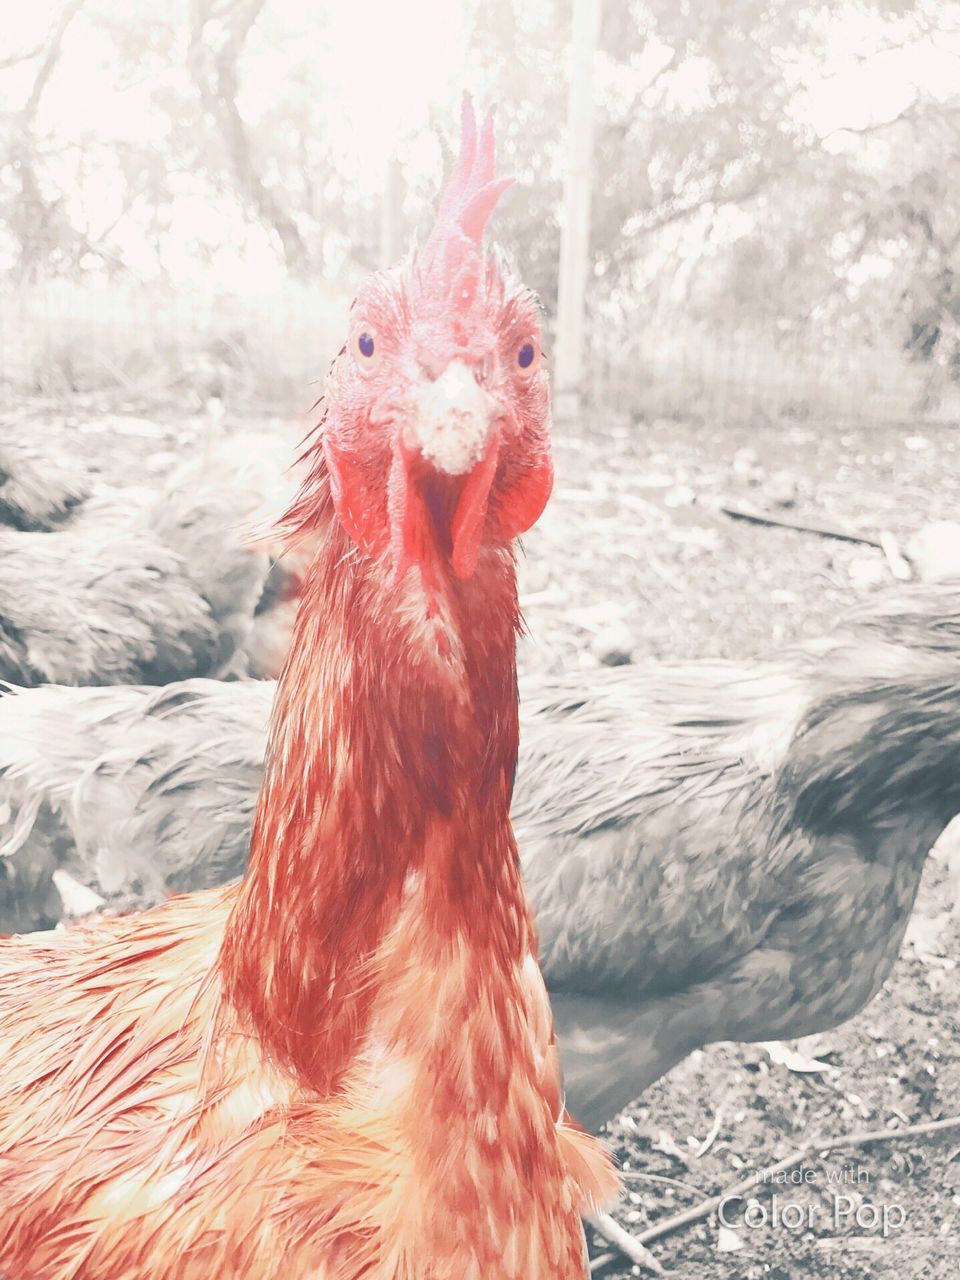 domestic animals, livestock, chicken - bird, red, rooster, bird, animal themes, day, outdoors, one animal, no people, nature, cold temperature, cockerel, pets, snow, hen, mammal